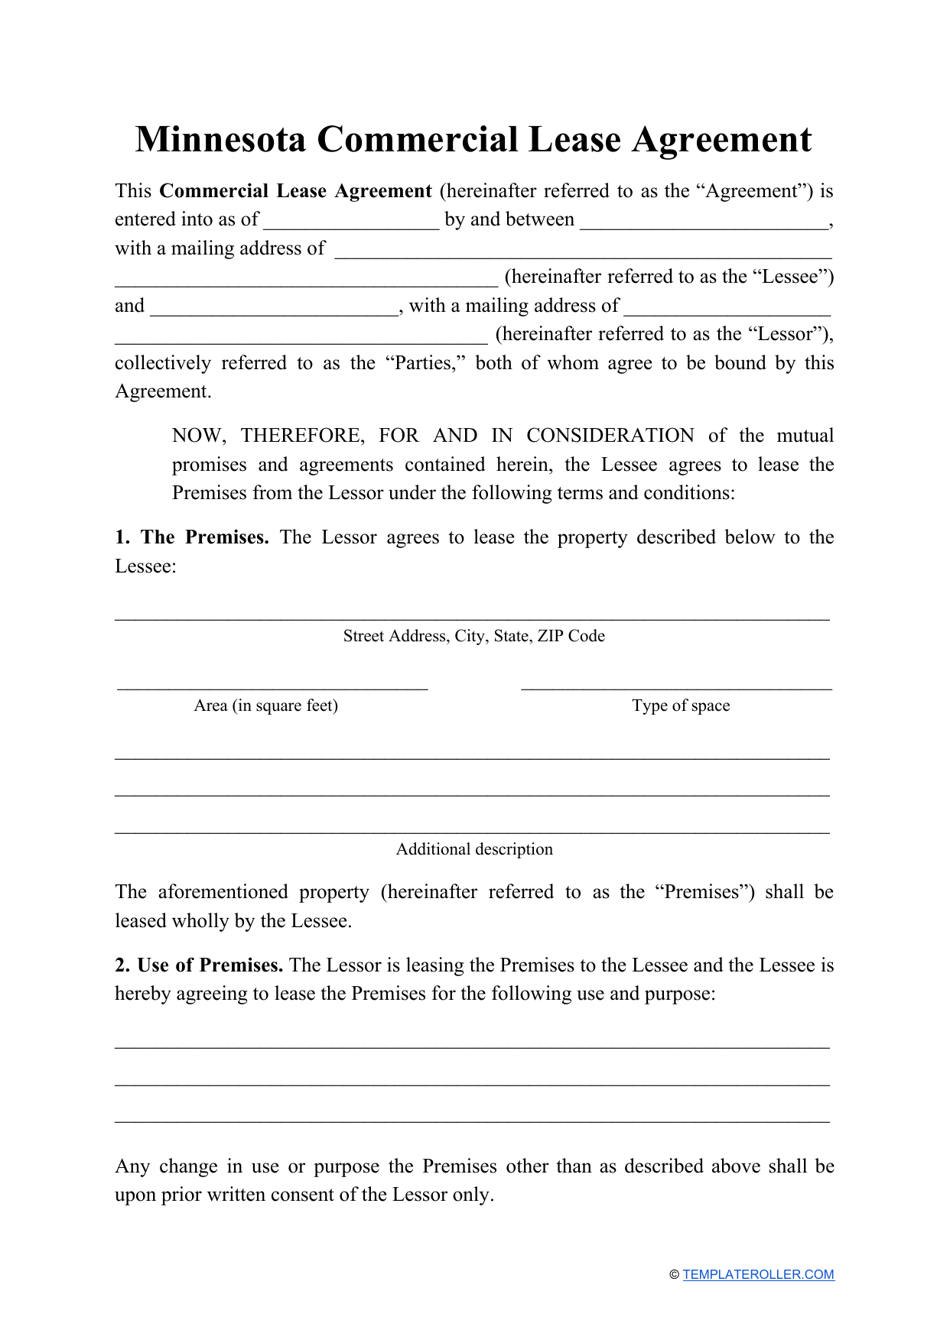 Commercial Lease Agreement Template - Minnesota, Page 1